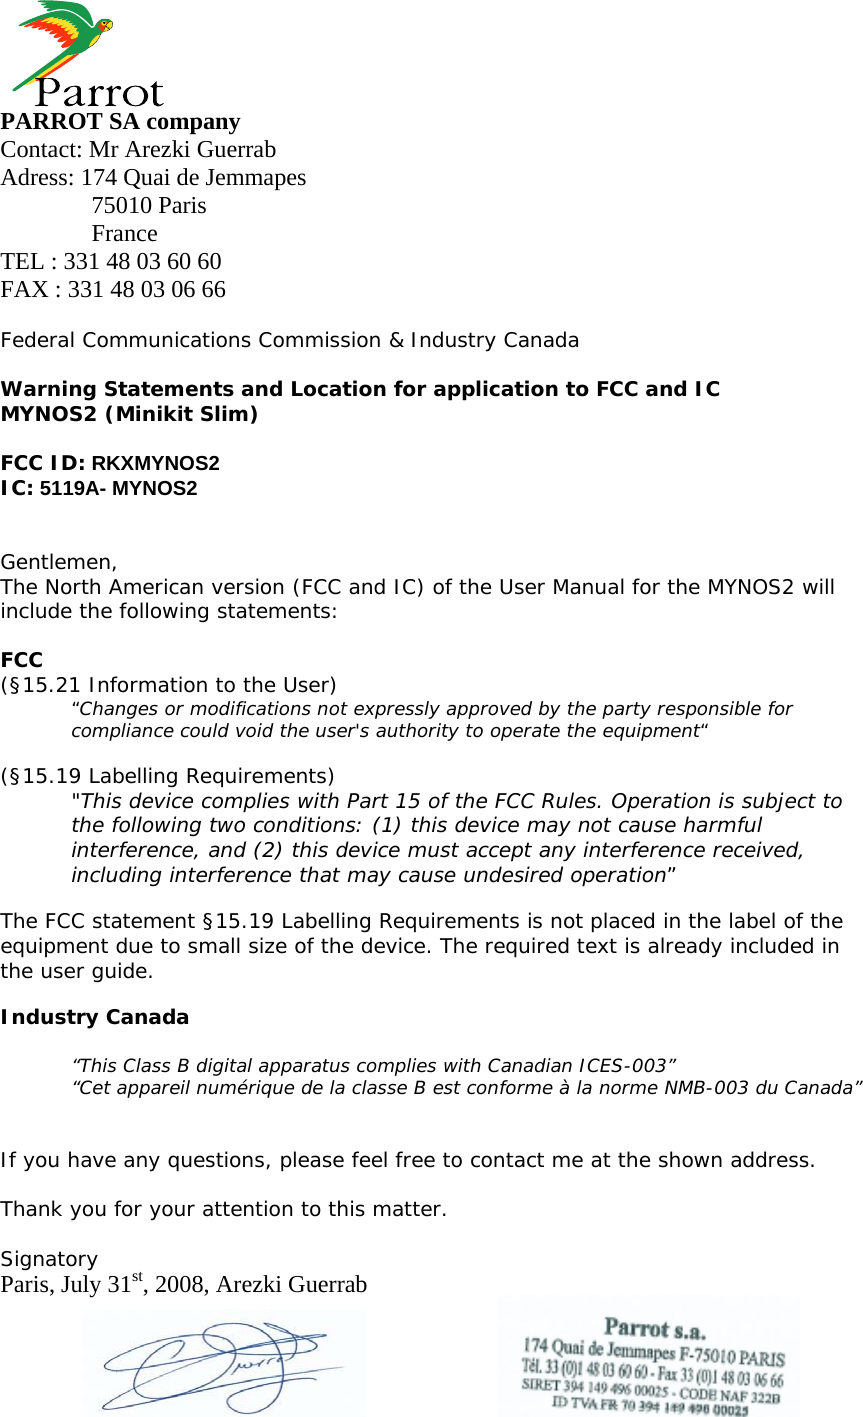     PARROT SA company Contact: Mr Arezki Guerrab Adress: 174 Quai de Jemmapes  75010 Paris  France TEL : 331 48 03 60 60 FAX : 331 48 03 06 66  Federal Communications Commission &amp; Industry Canada  Warning Statements and Location for application to FCC and IC MYNOS2 (Minikit Slim)  FCC ID: RKXMYNOS2 IC: 5119A- MYNOS2   Gentlemen, The North American version (FCC and IC) of the User Manual for the MYNOS2 will include the following statements:  FCC (§15.21 Information to the User) “Changes or modifications not expressly approved by the party responsible for compliance could void the user&apos;s authority to operate the equipment“  (§15.19 Labelling Requirements) &quot;This device complies with Part 15 of the FCC Rules. Operation is subject to the following two conditions: (1) this device may not cause harmful interference, and (2) this device must accept any interference received, including interference that may cause undesired operation”  The FCC statement §15.19 Labelling Requirements is not placed in the label of the equipment due to small size of the device. The required text is already included in the user guide.  Industry Canada  “This Class B digital apparatus complies with Canadian ICES-003” “Cet appareil numérique de la classe B est conforme à la norme NMB-003 du Canada”   If you have any questions, please feel free to contact me at the shown address.  Thank you for your attention to this matter.  Signatory Paris, July 31st, 2008, Arezki Guerrab    